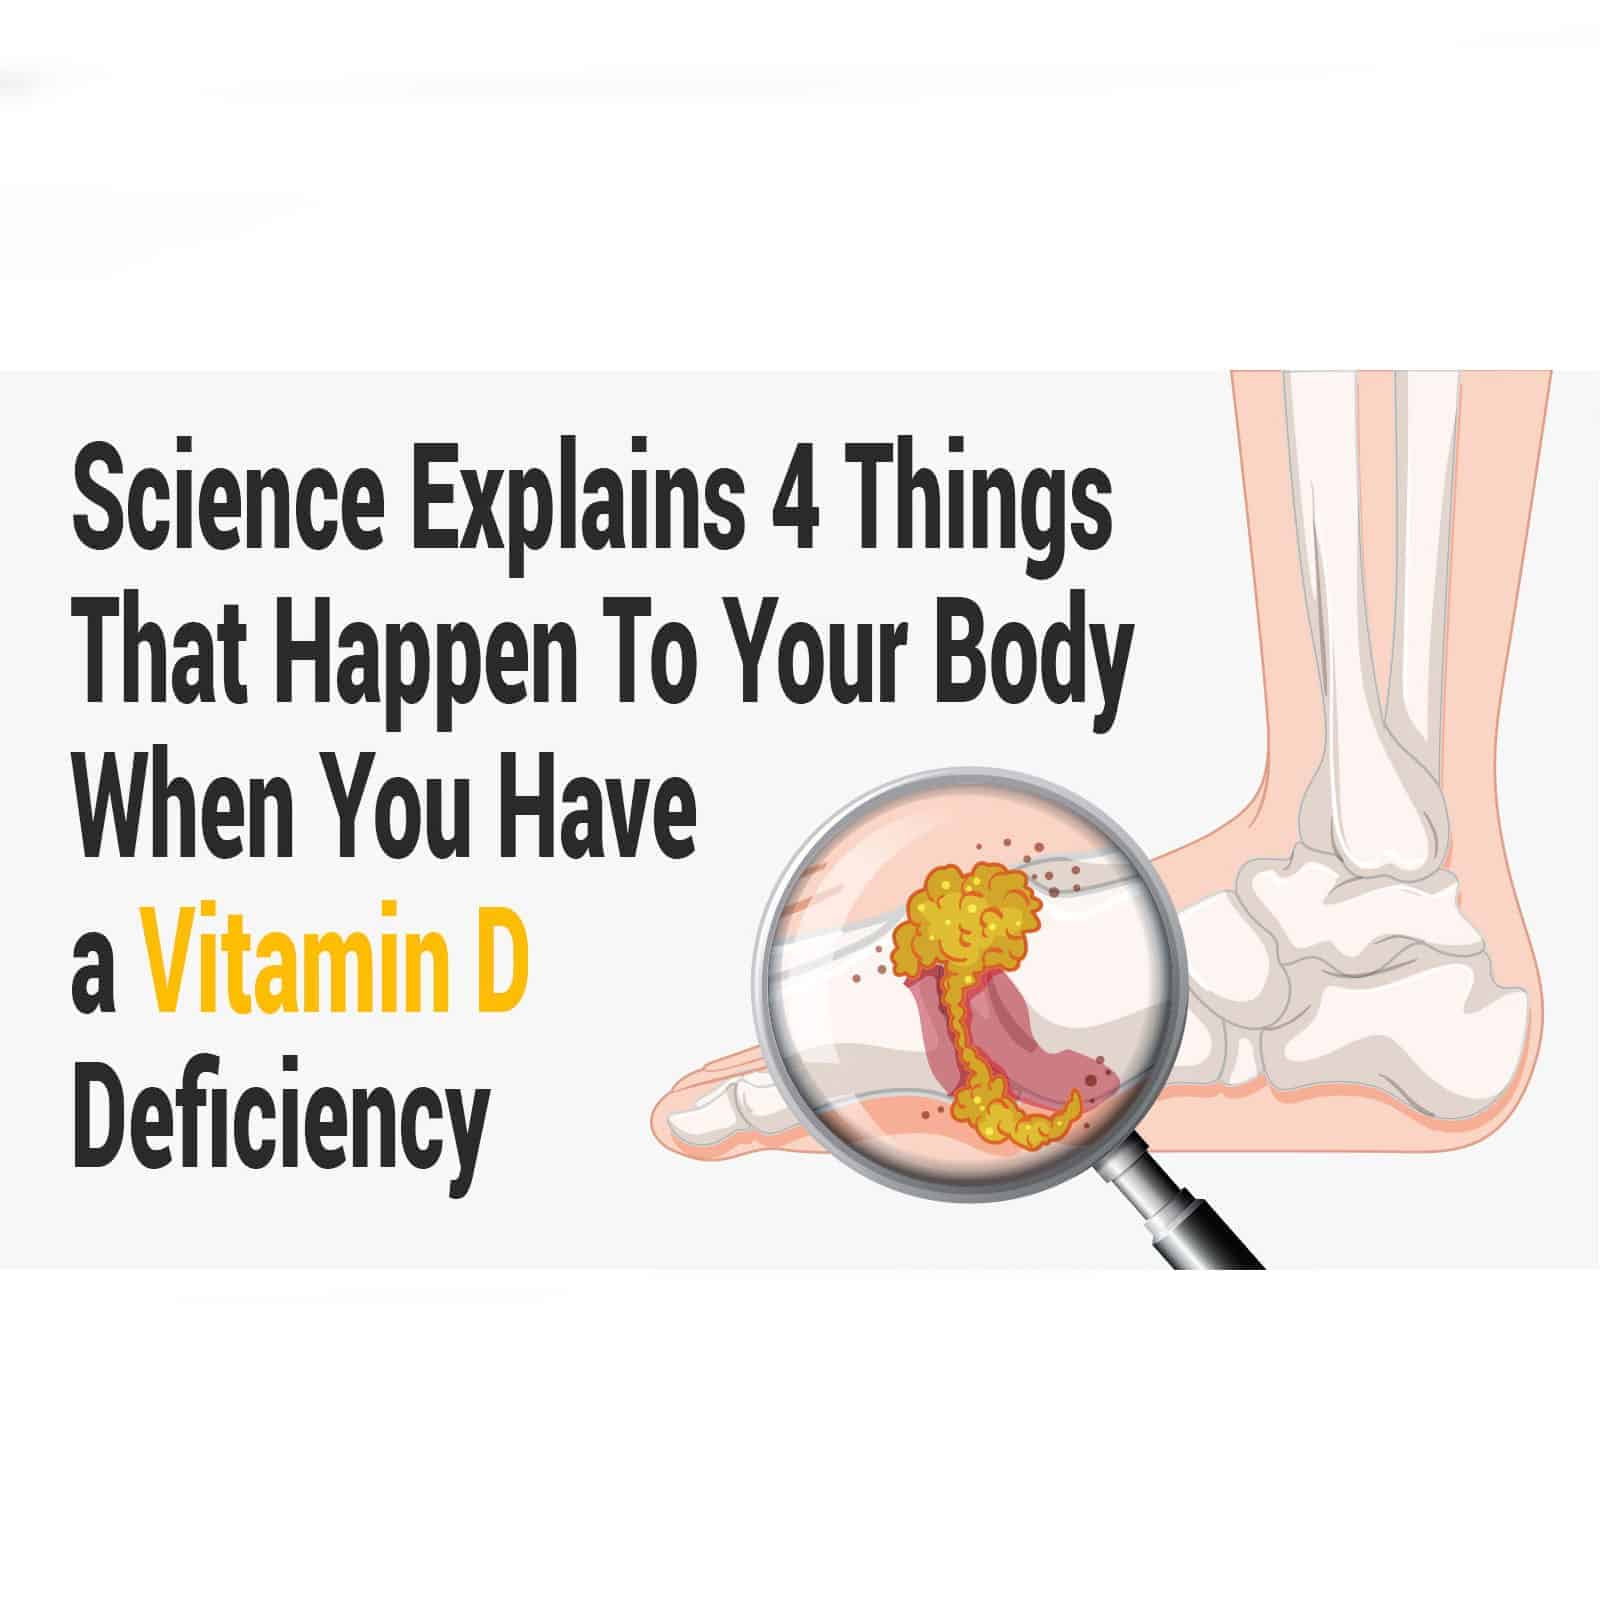 Science Explains 4 Things That Happen To Your Body When You Have a Vitamin D Deficiency